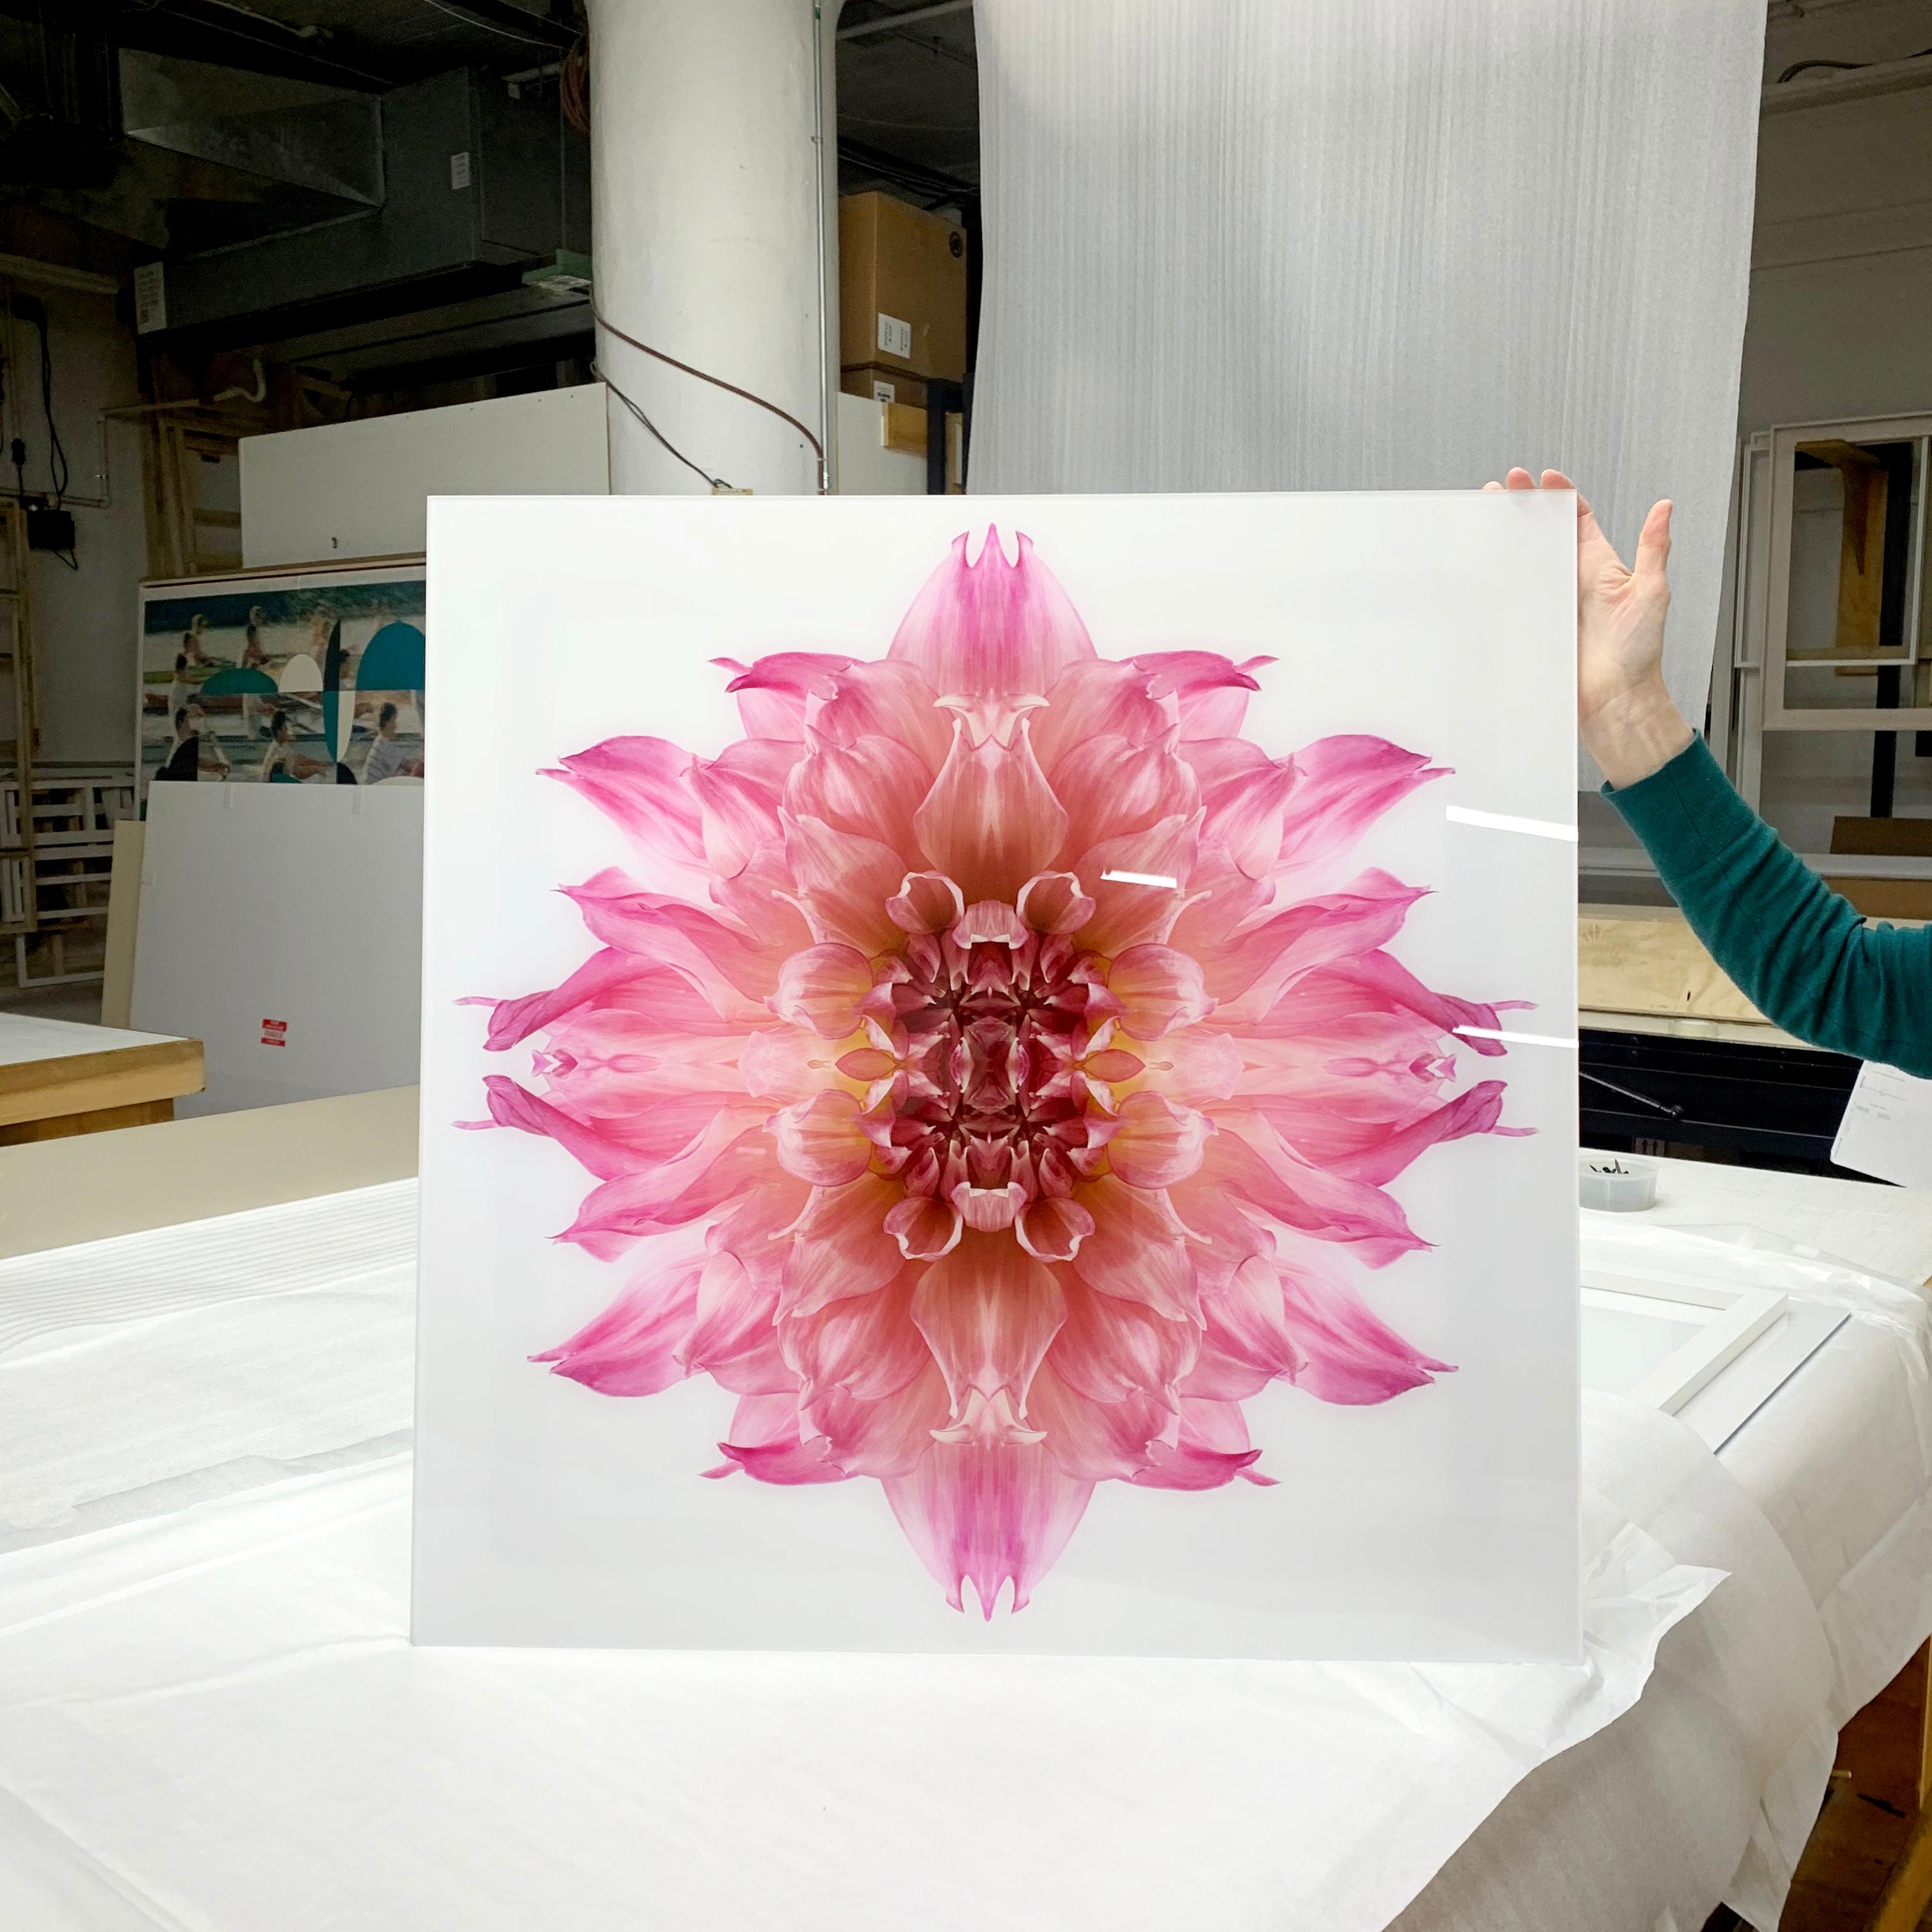 This print features the playful relationship between natural forms and botanicals. In this image Erin uses the natural composition of the pink Dahlia, and her own collage work, to create a hypnotic mandala with the floral. Some describe it as a